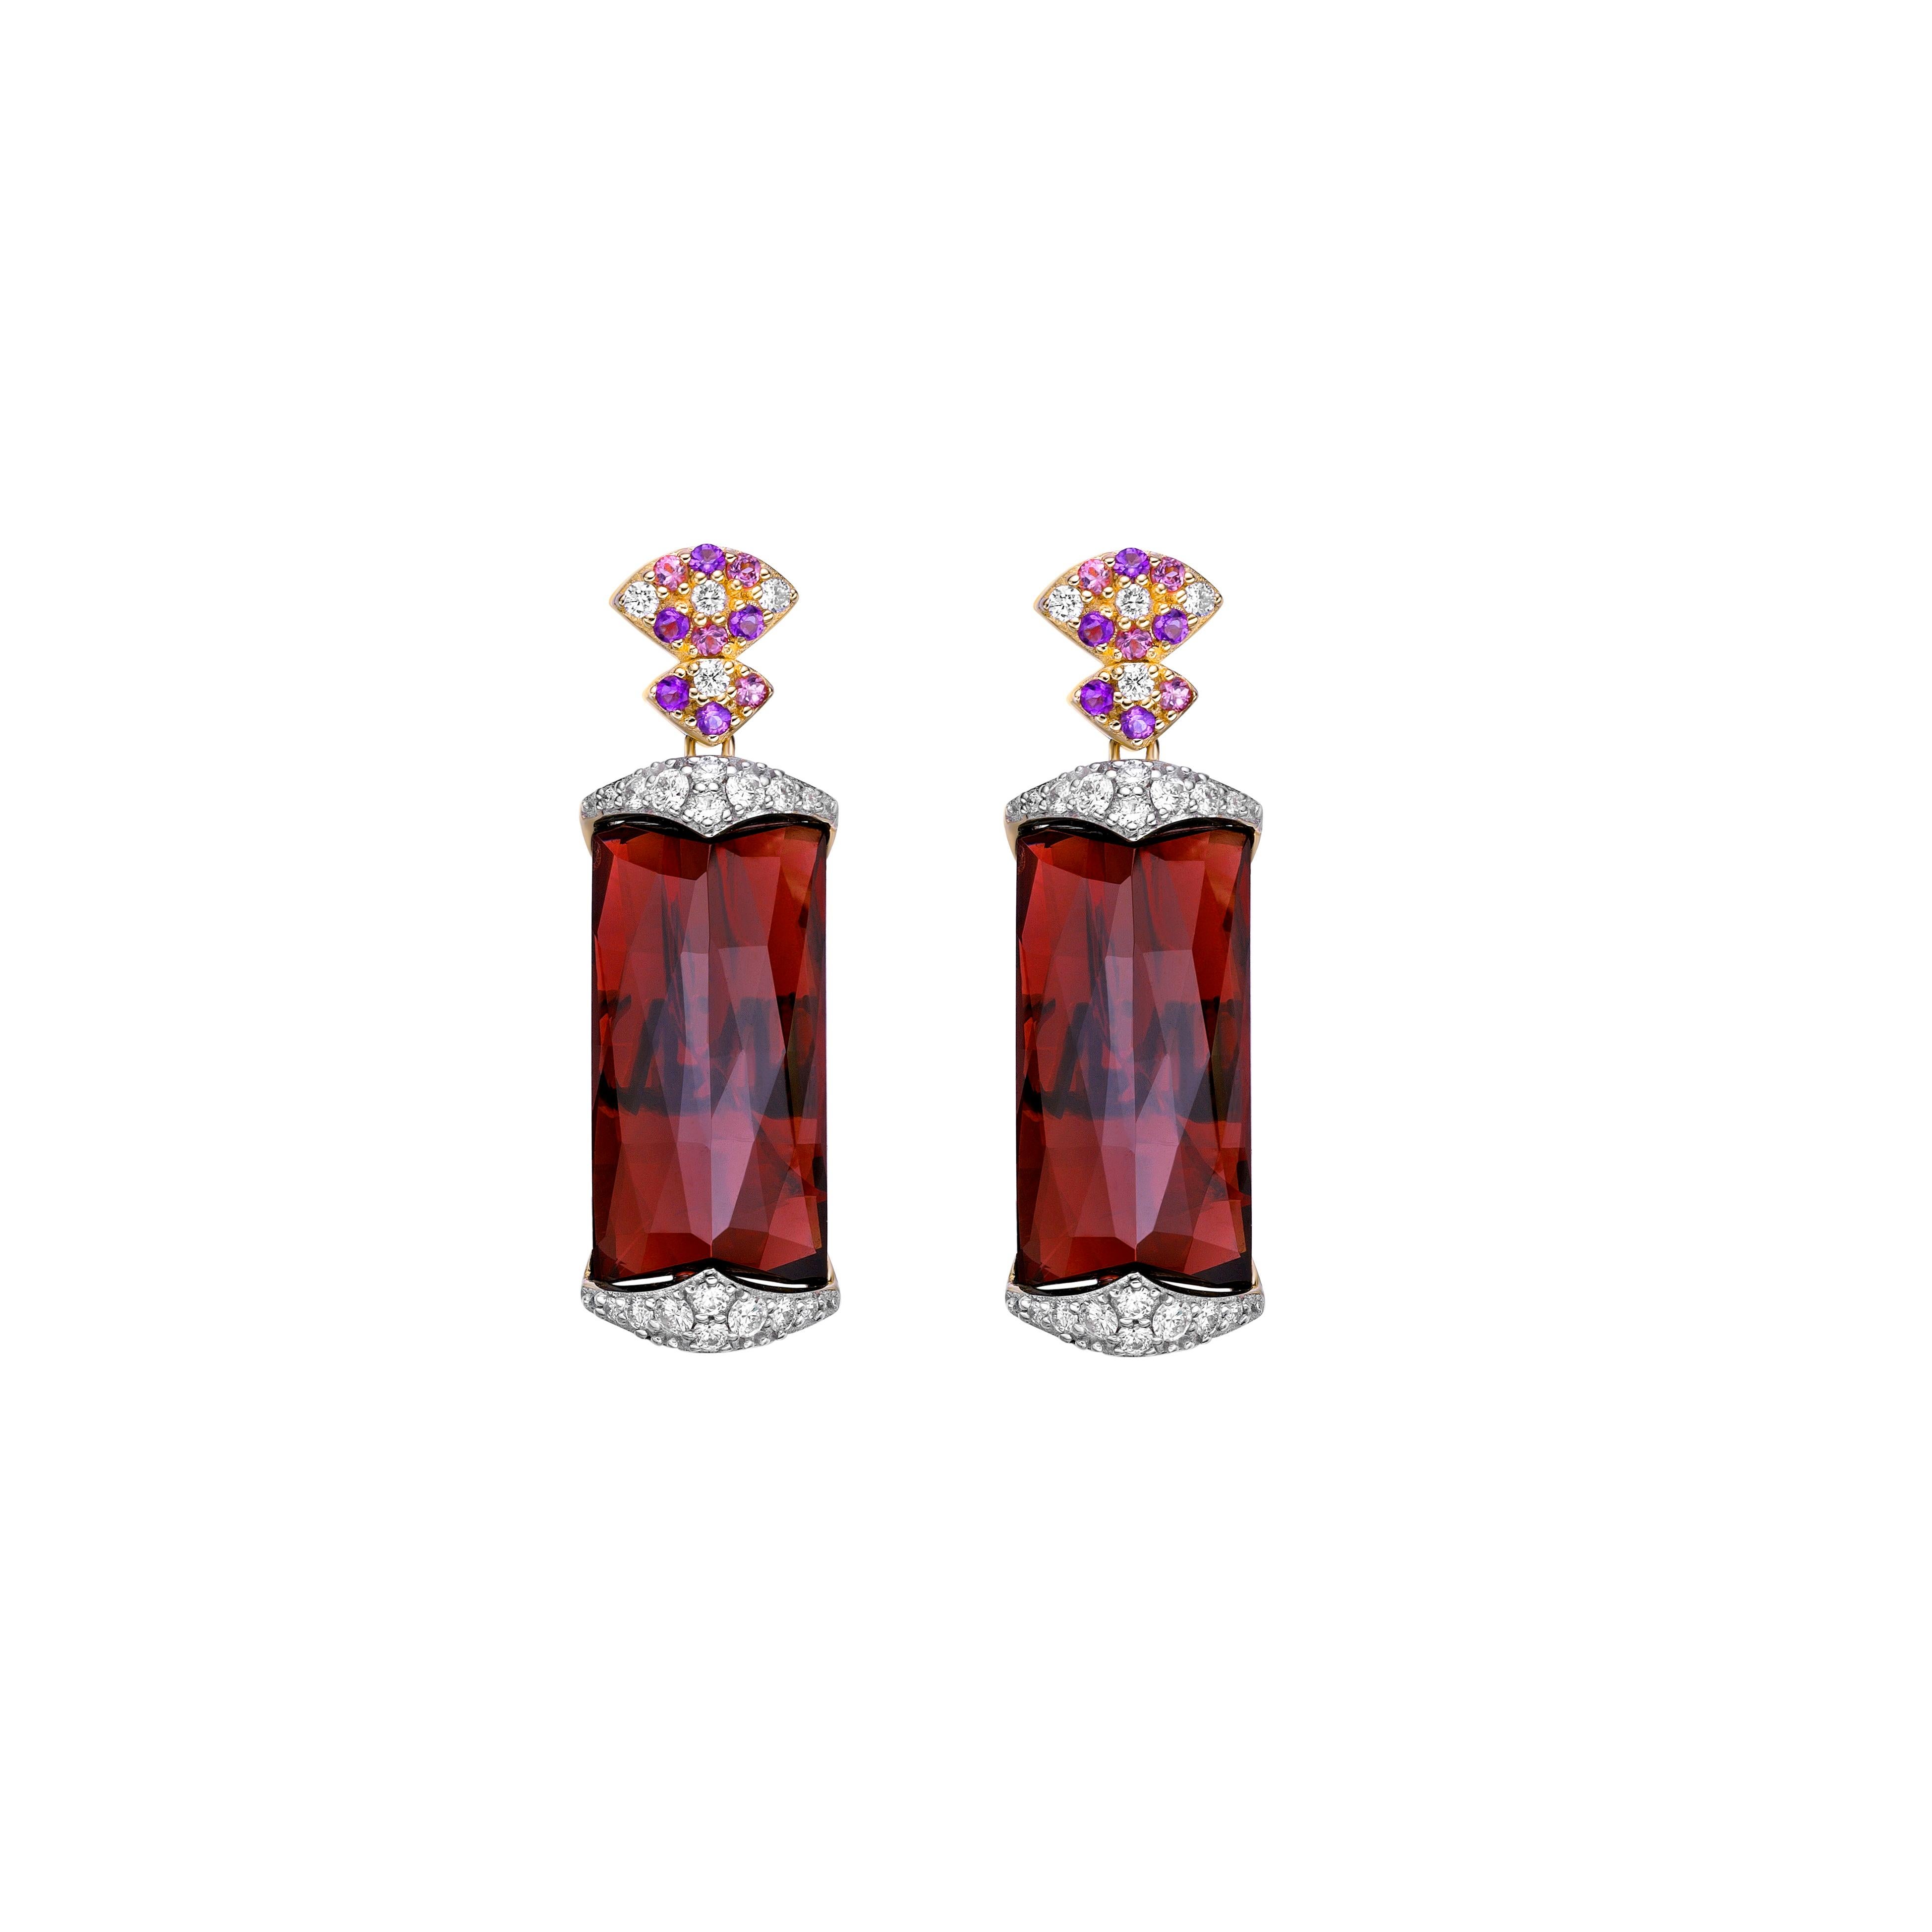 Contemporary 34.75 Carat Garnet Drop Earring in 18Karat Yellow Gold with Multi Stone. For Sale